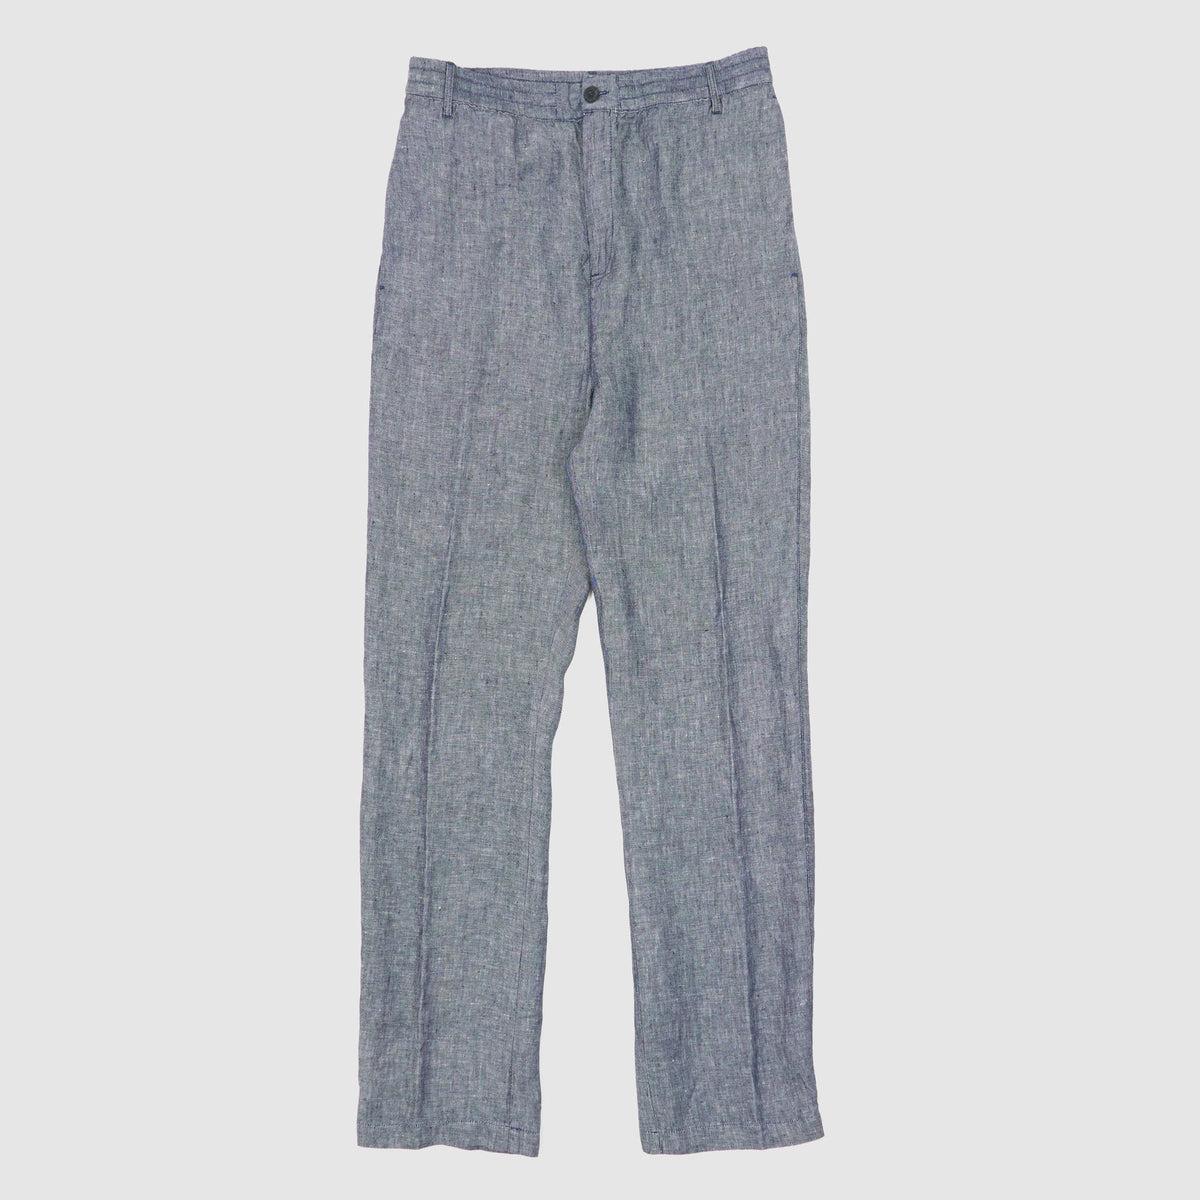 120% Lino Relaxed Men Linen Chino Trousers